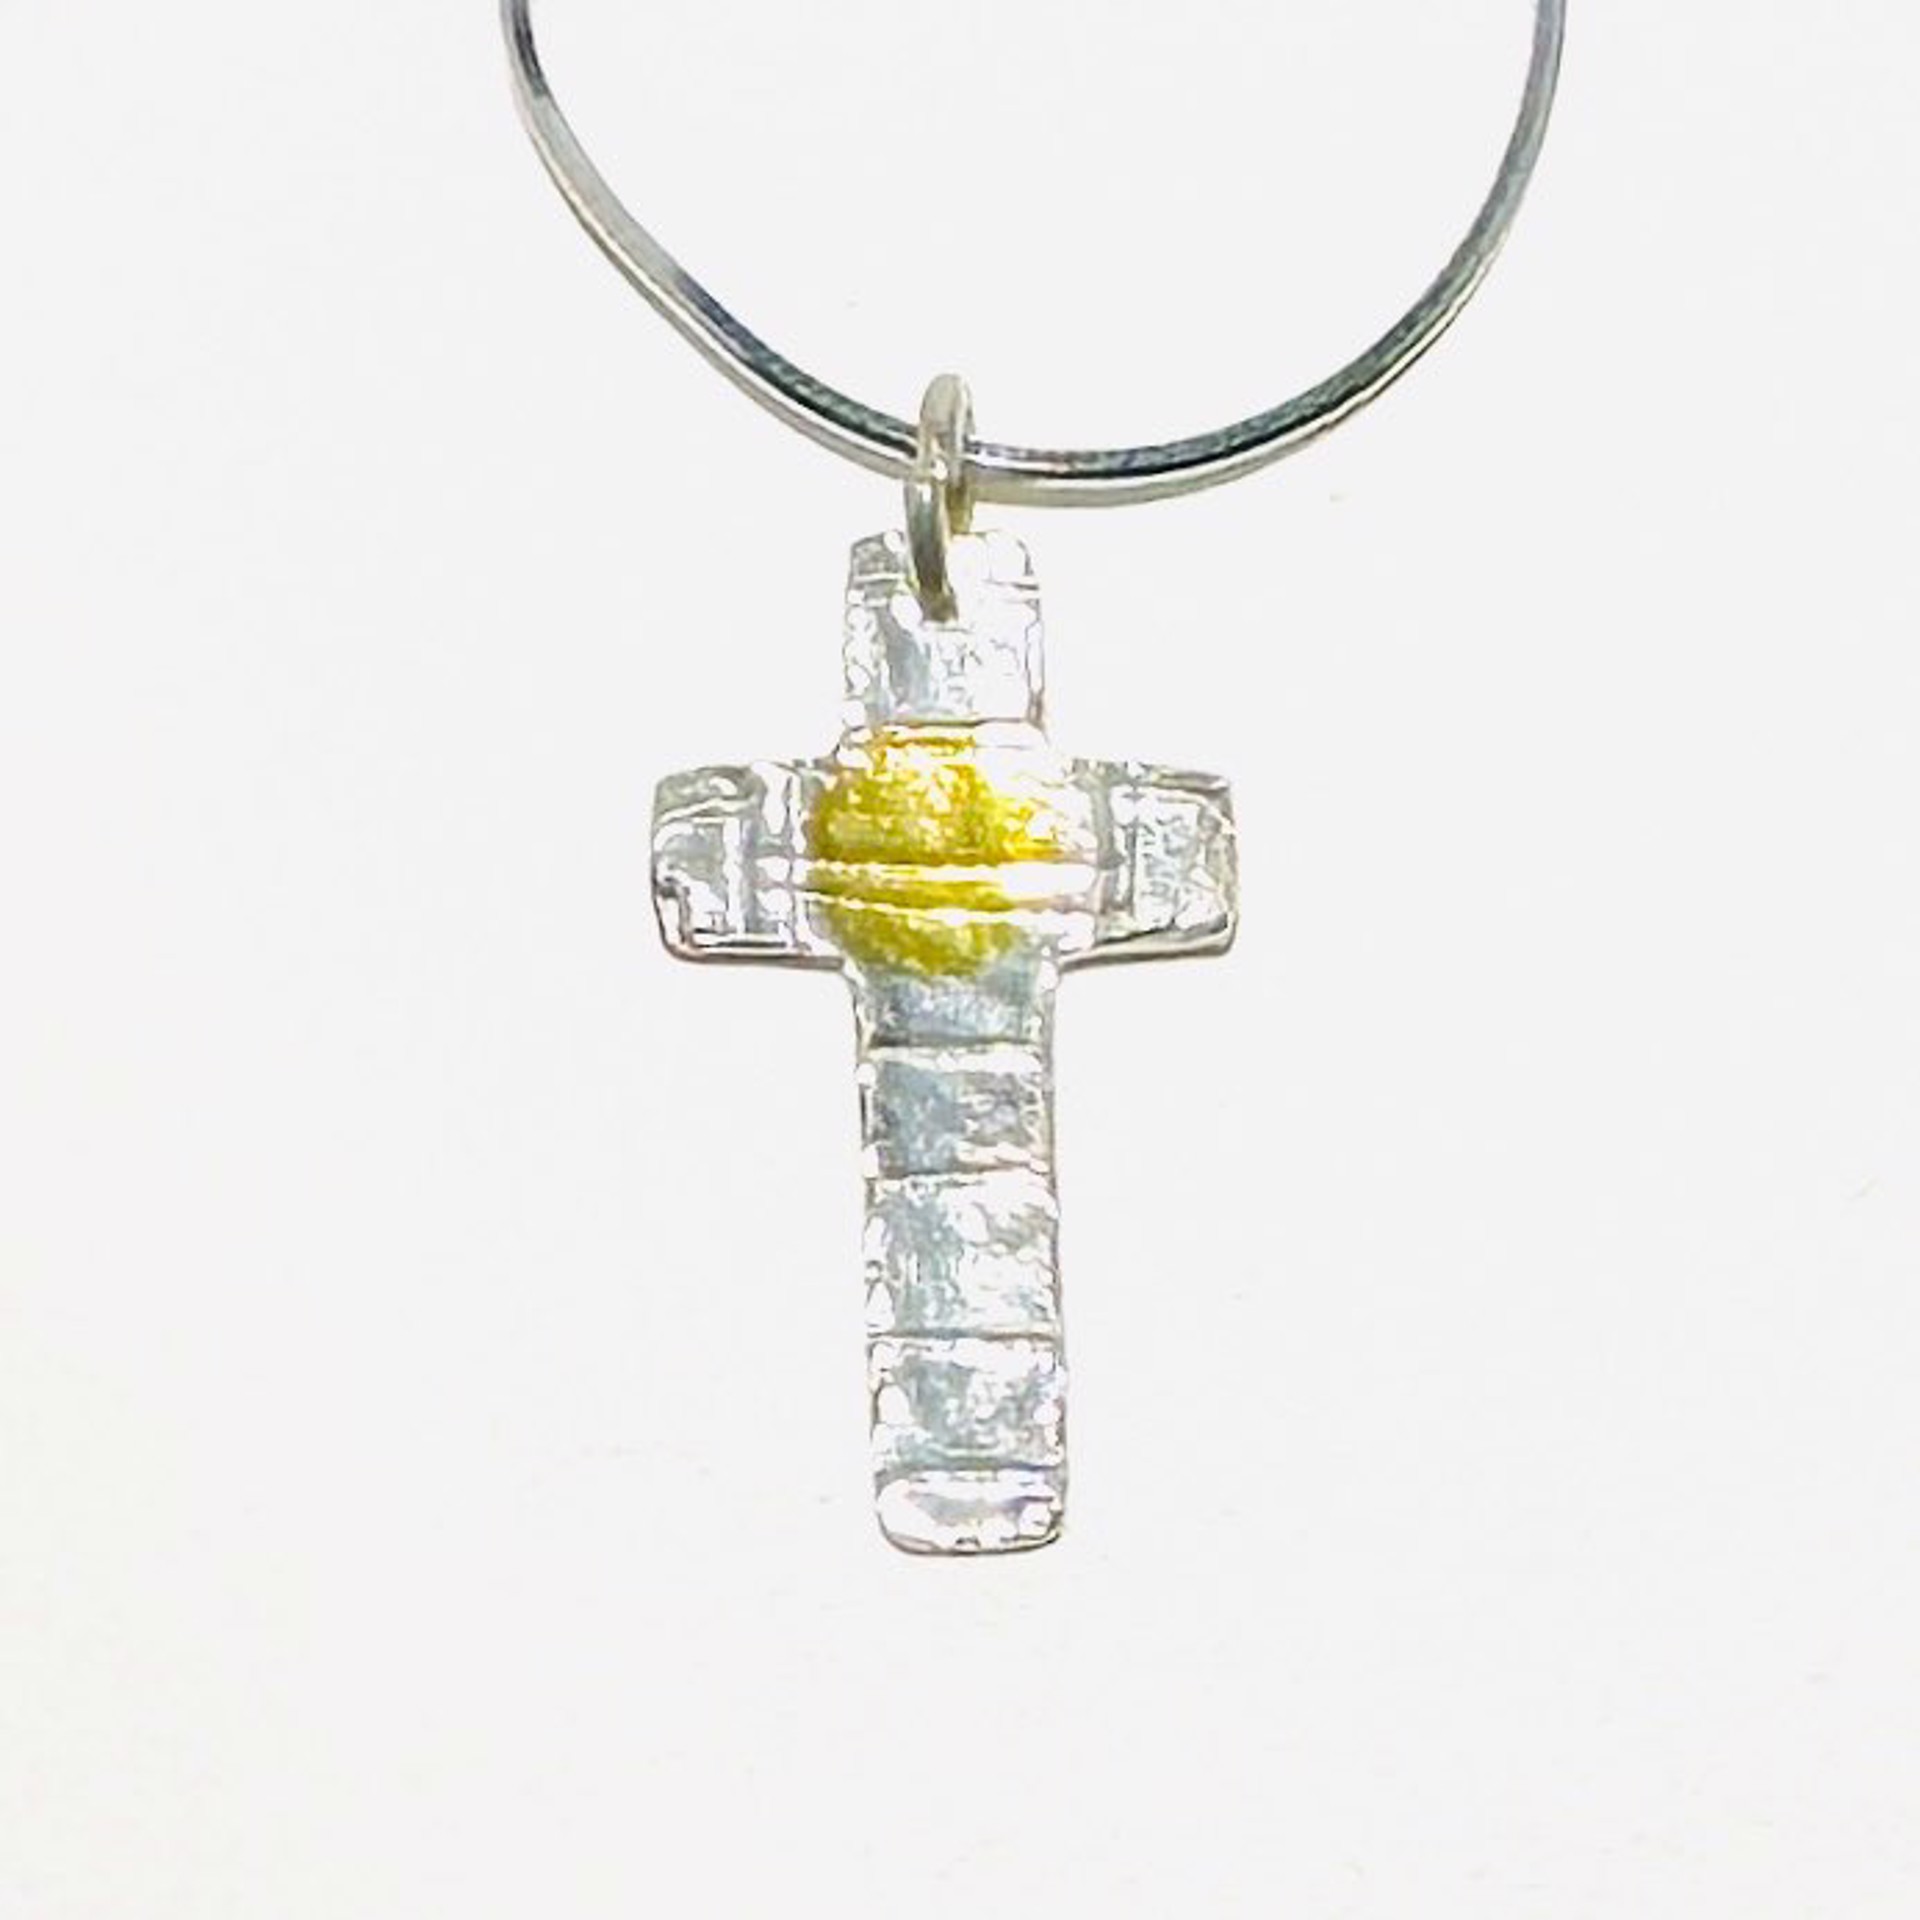 Keum-boo Fine Silver and Gold Reversible Cross Necklace KH23-45 by Karen Hakim